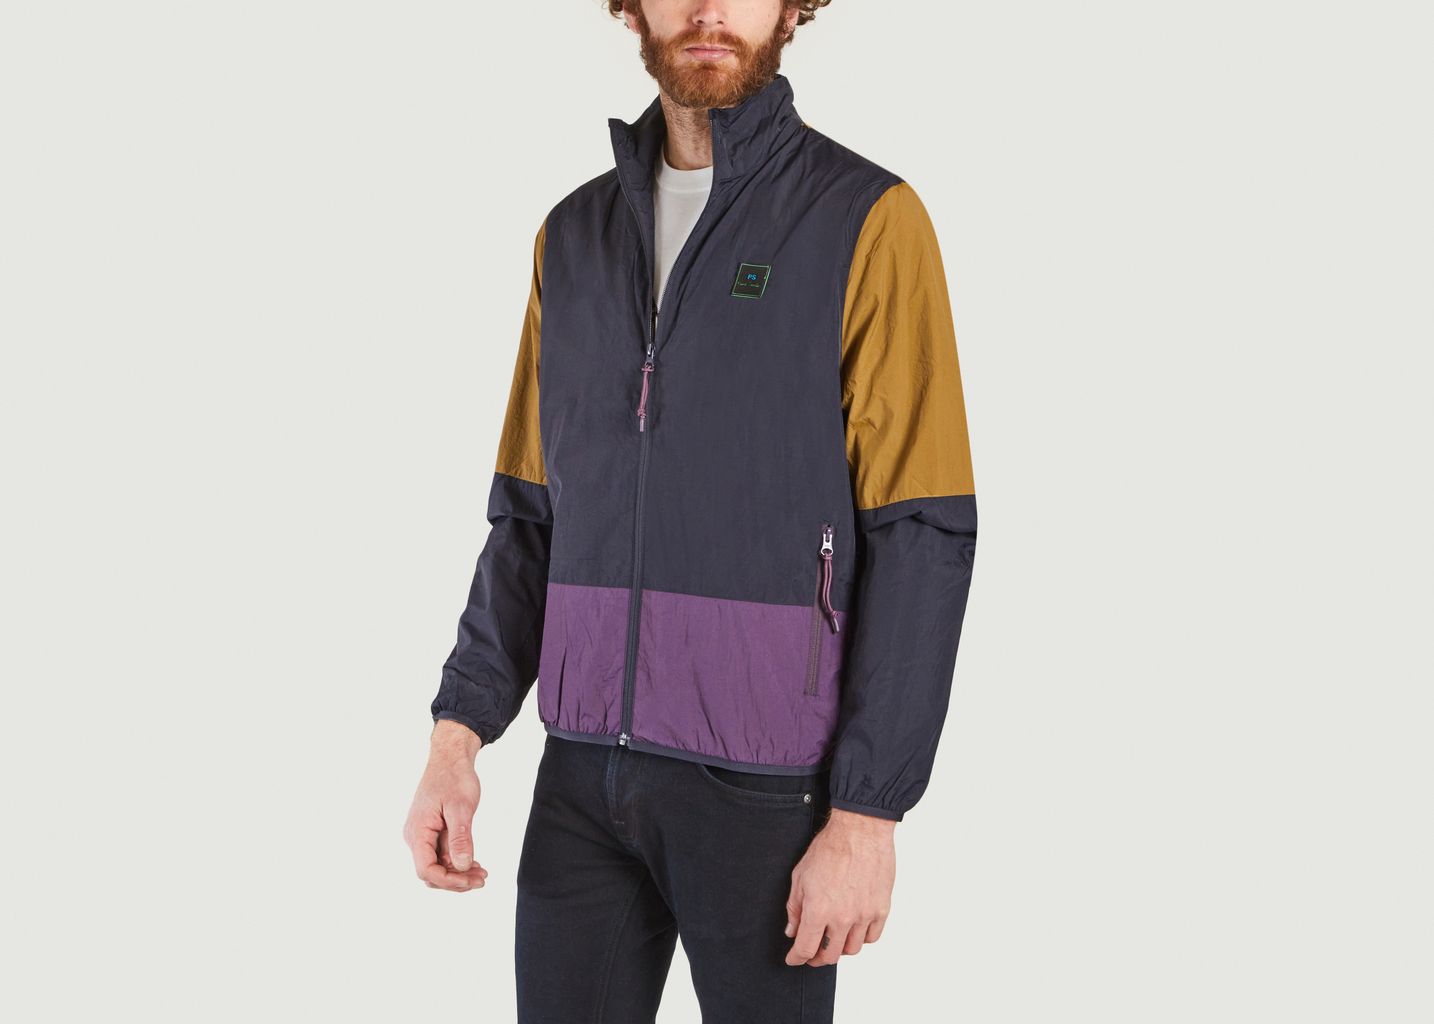 Packaway Track Jacket - PS by PAUL SMITH